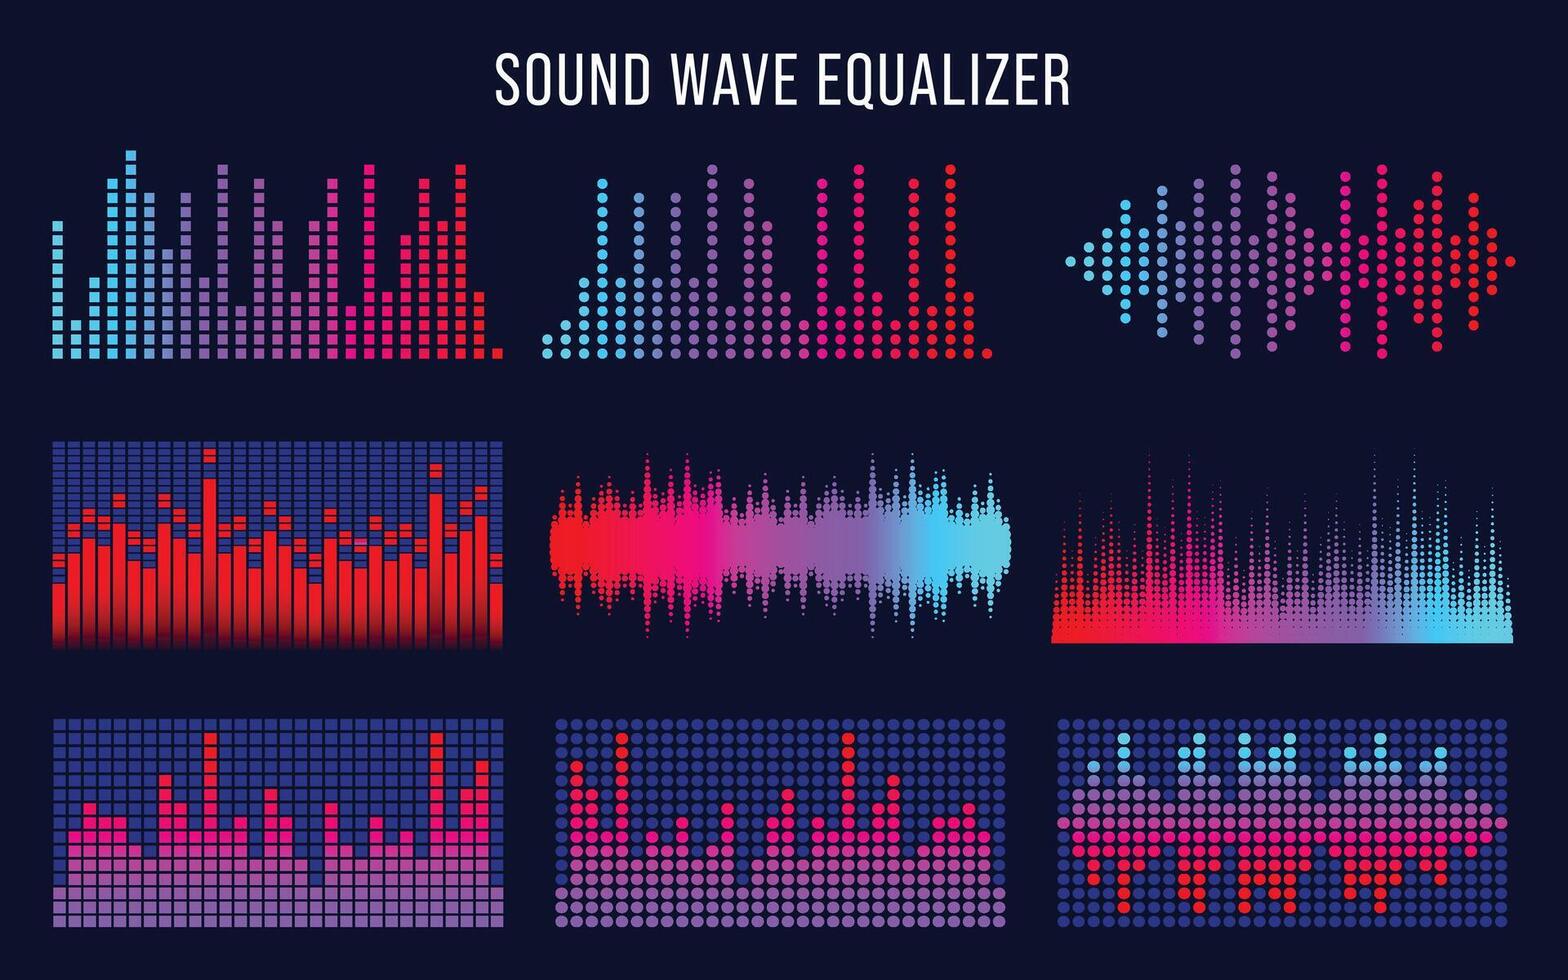 Sound waves audio music interface elements vector